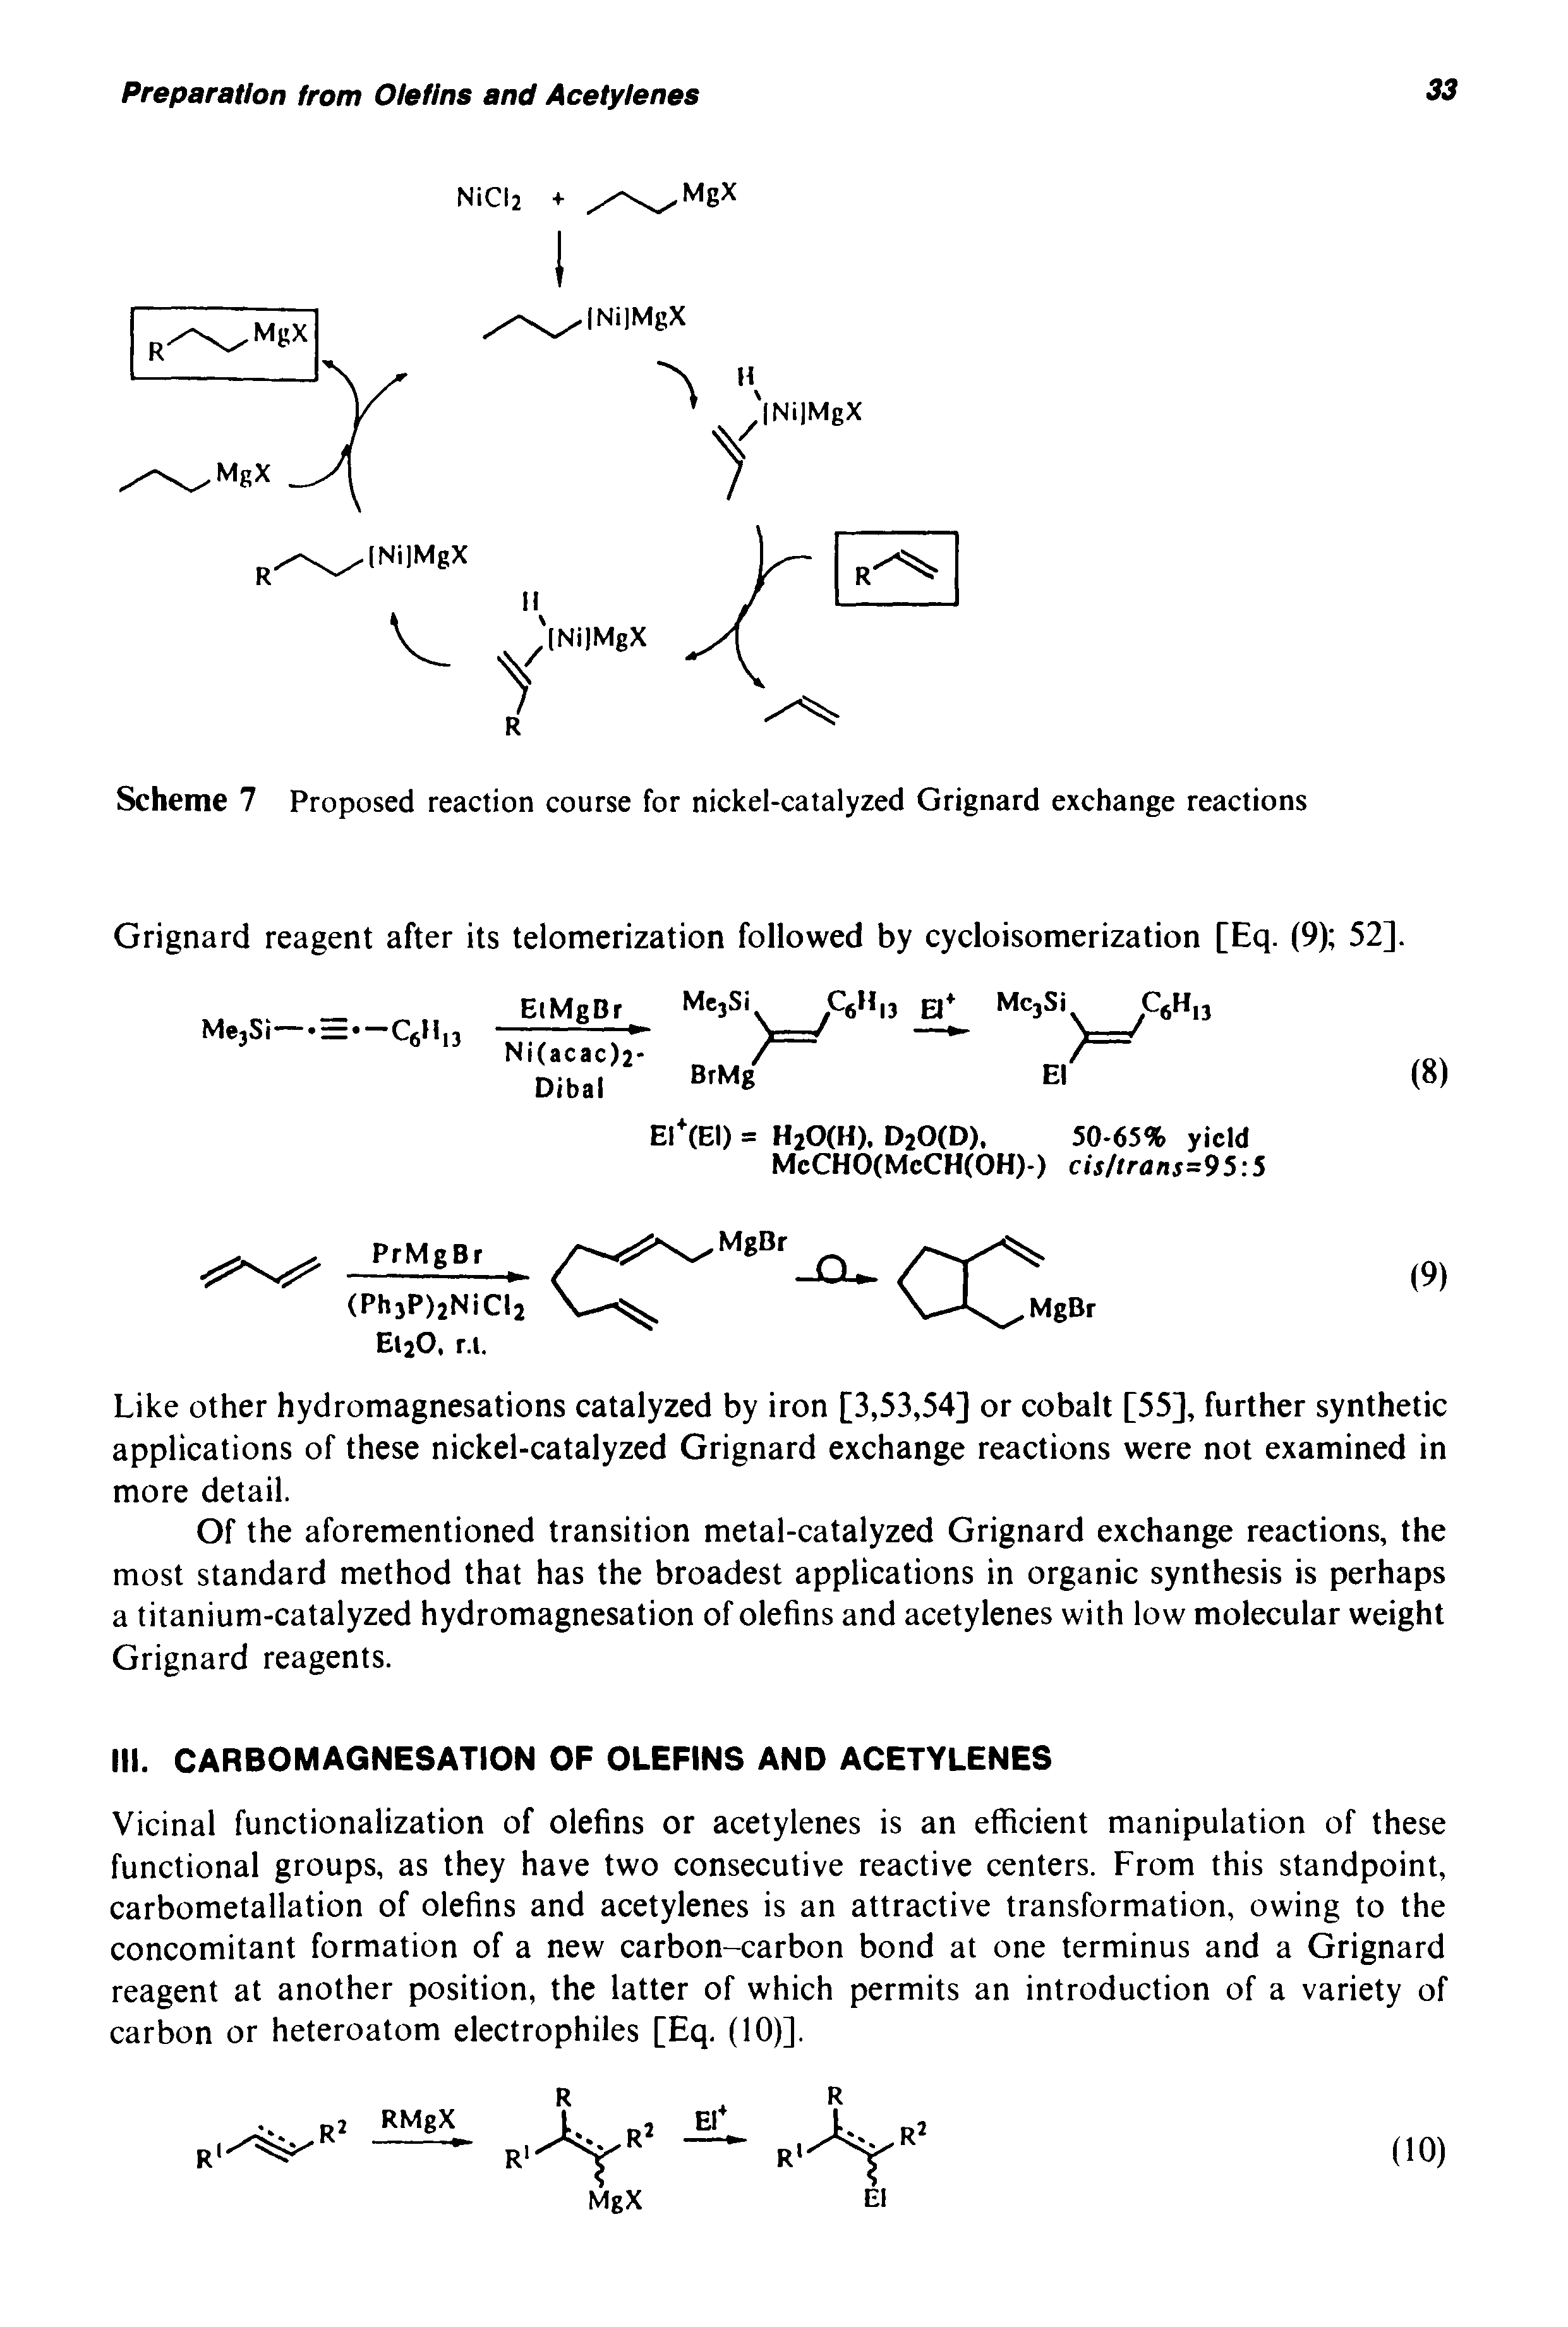 Scheme 7 Proposed reaction course for nickel-catalyzed Grignard exchange reactions...